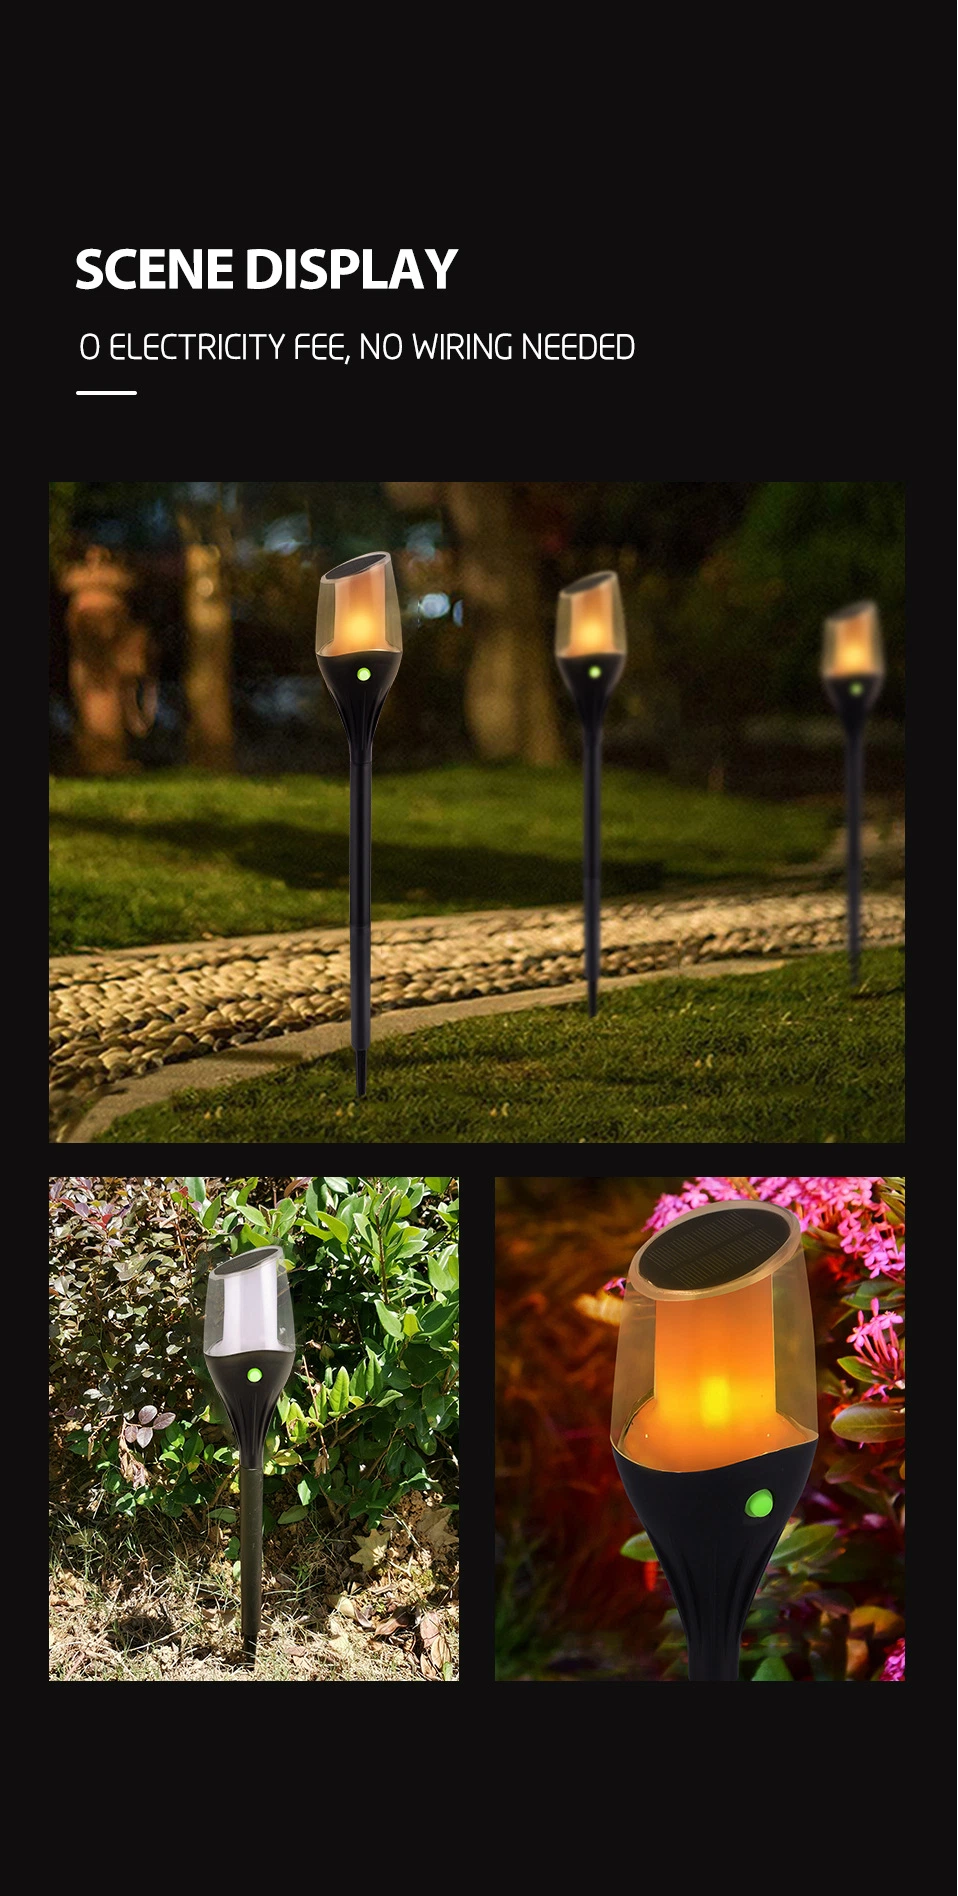 Factory IP65 Waterproof Automatic on/off LED Solar Flame Garden Torches Lights